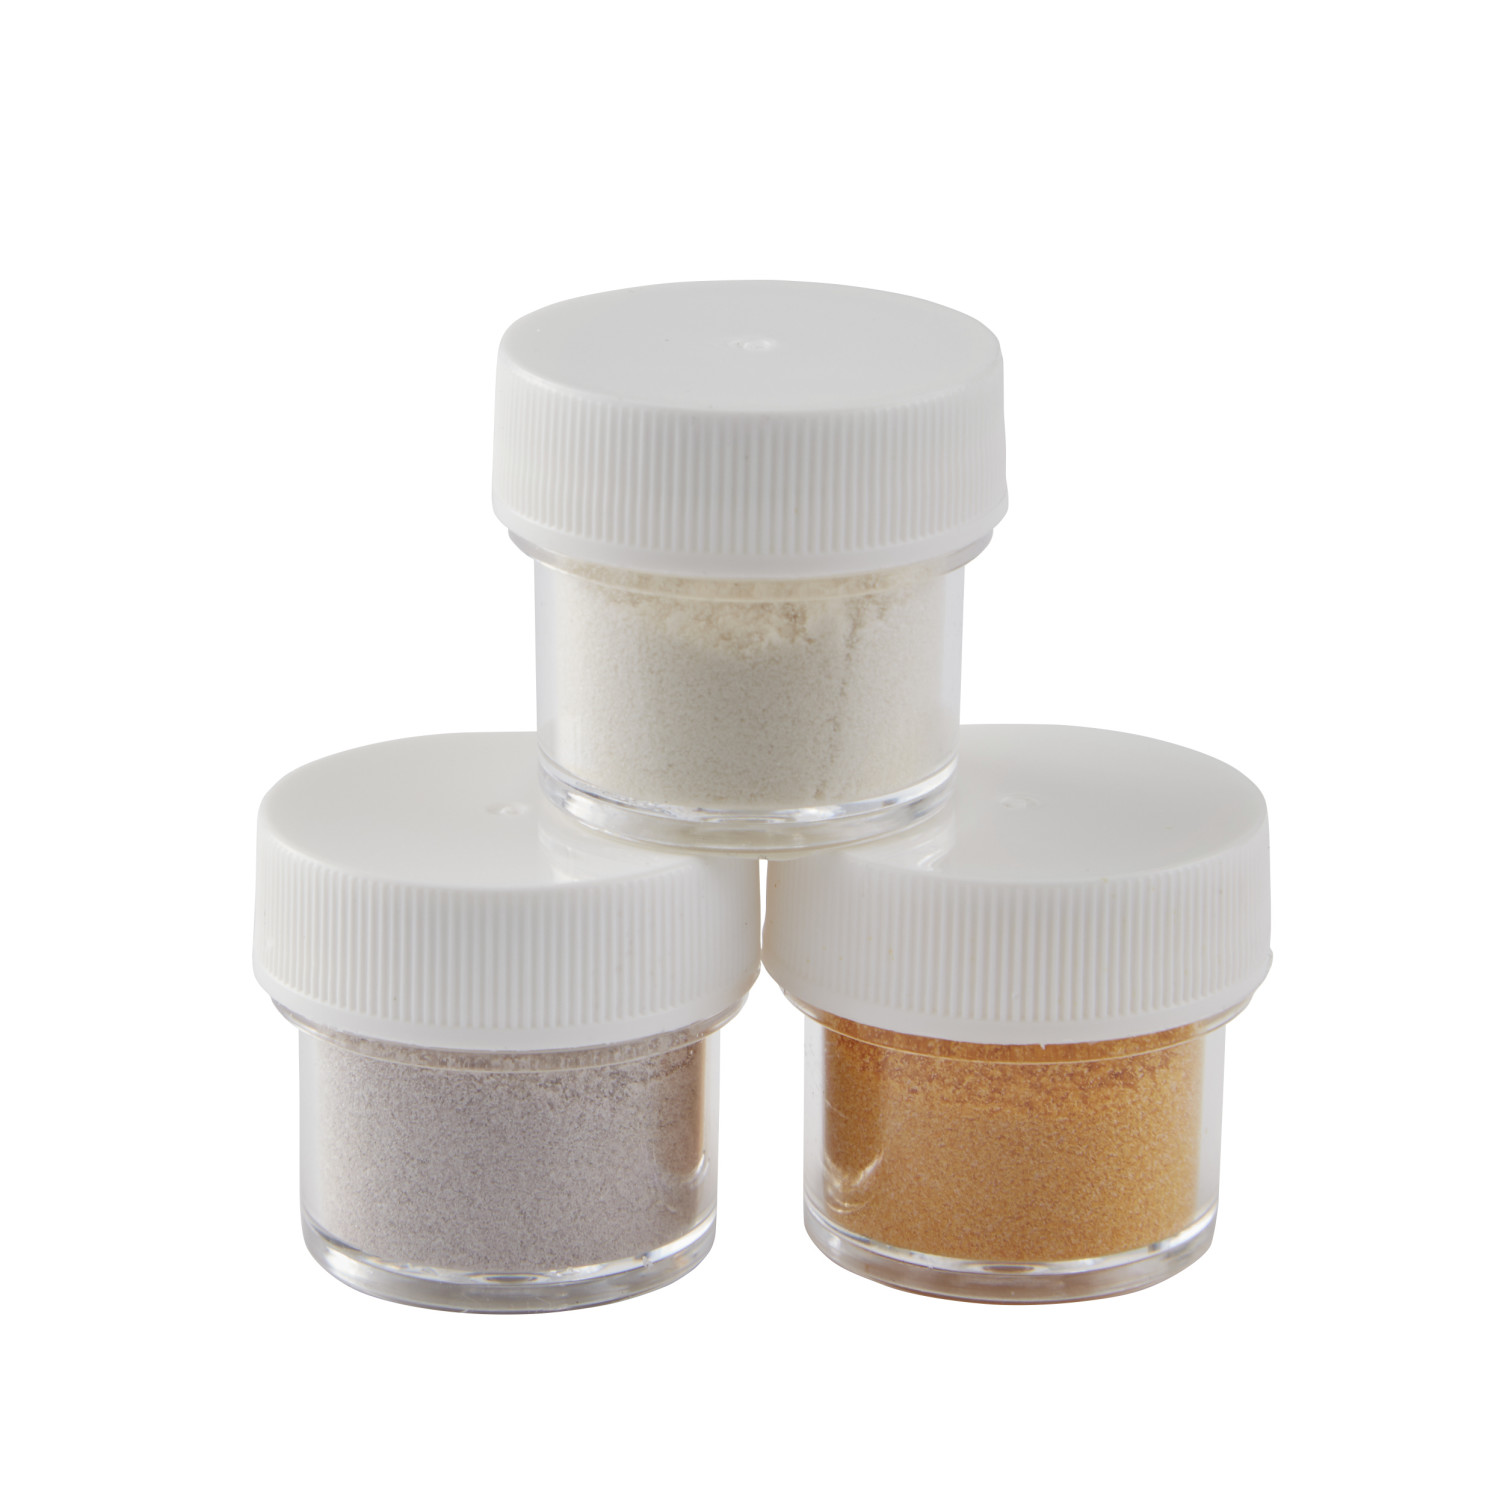 A Sprinkle and a Dash My Edible Candles - set of 4 - Sweet Baking Supply